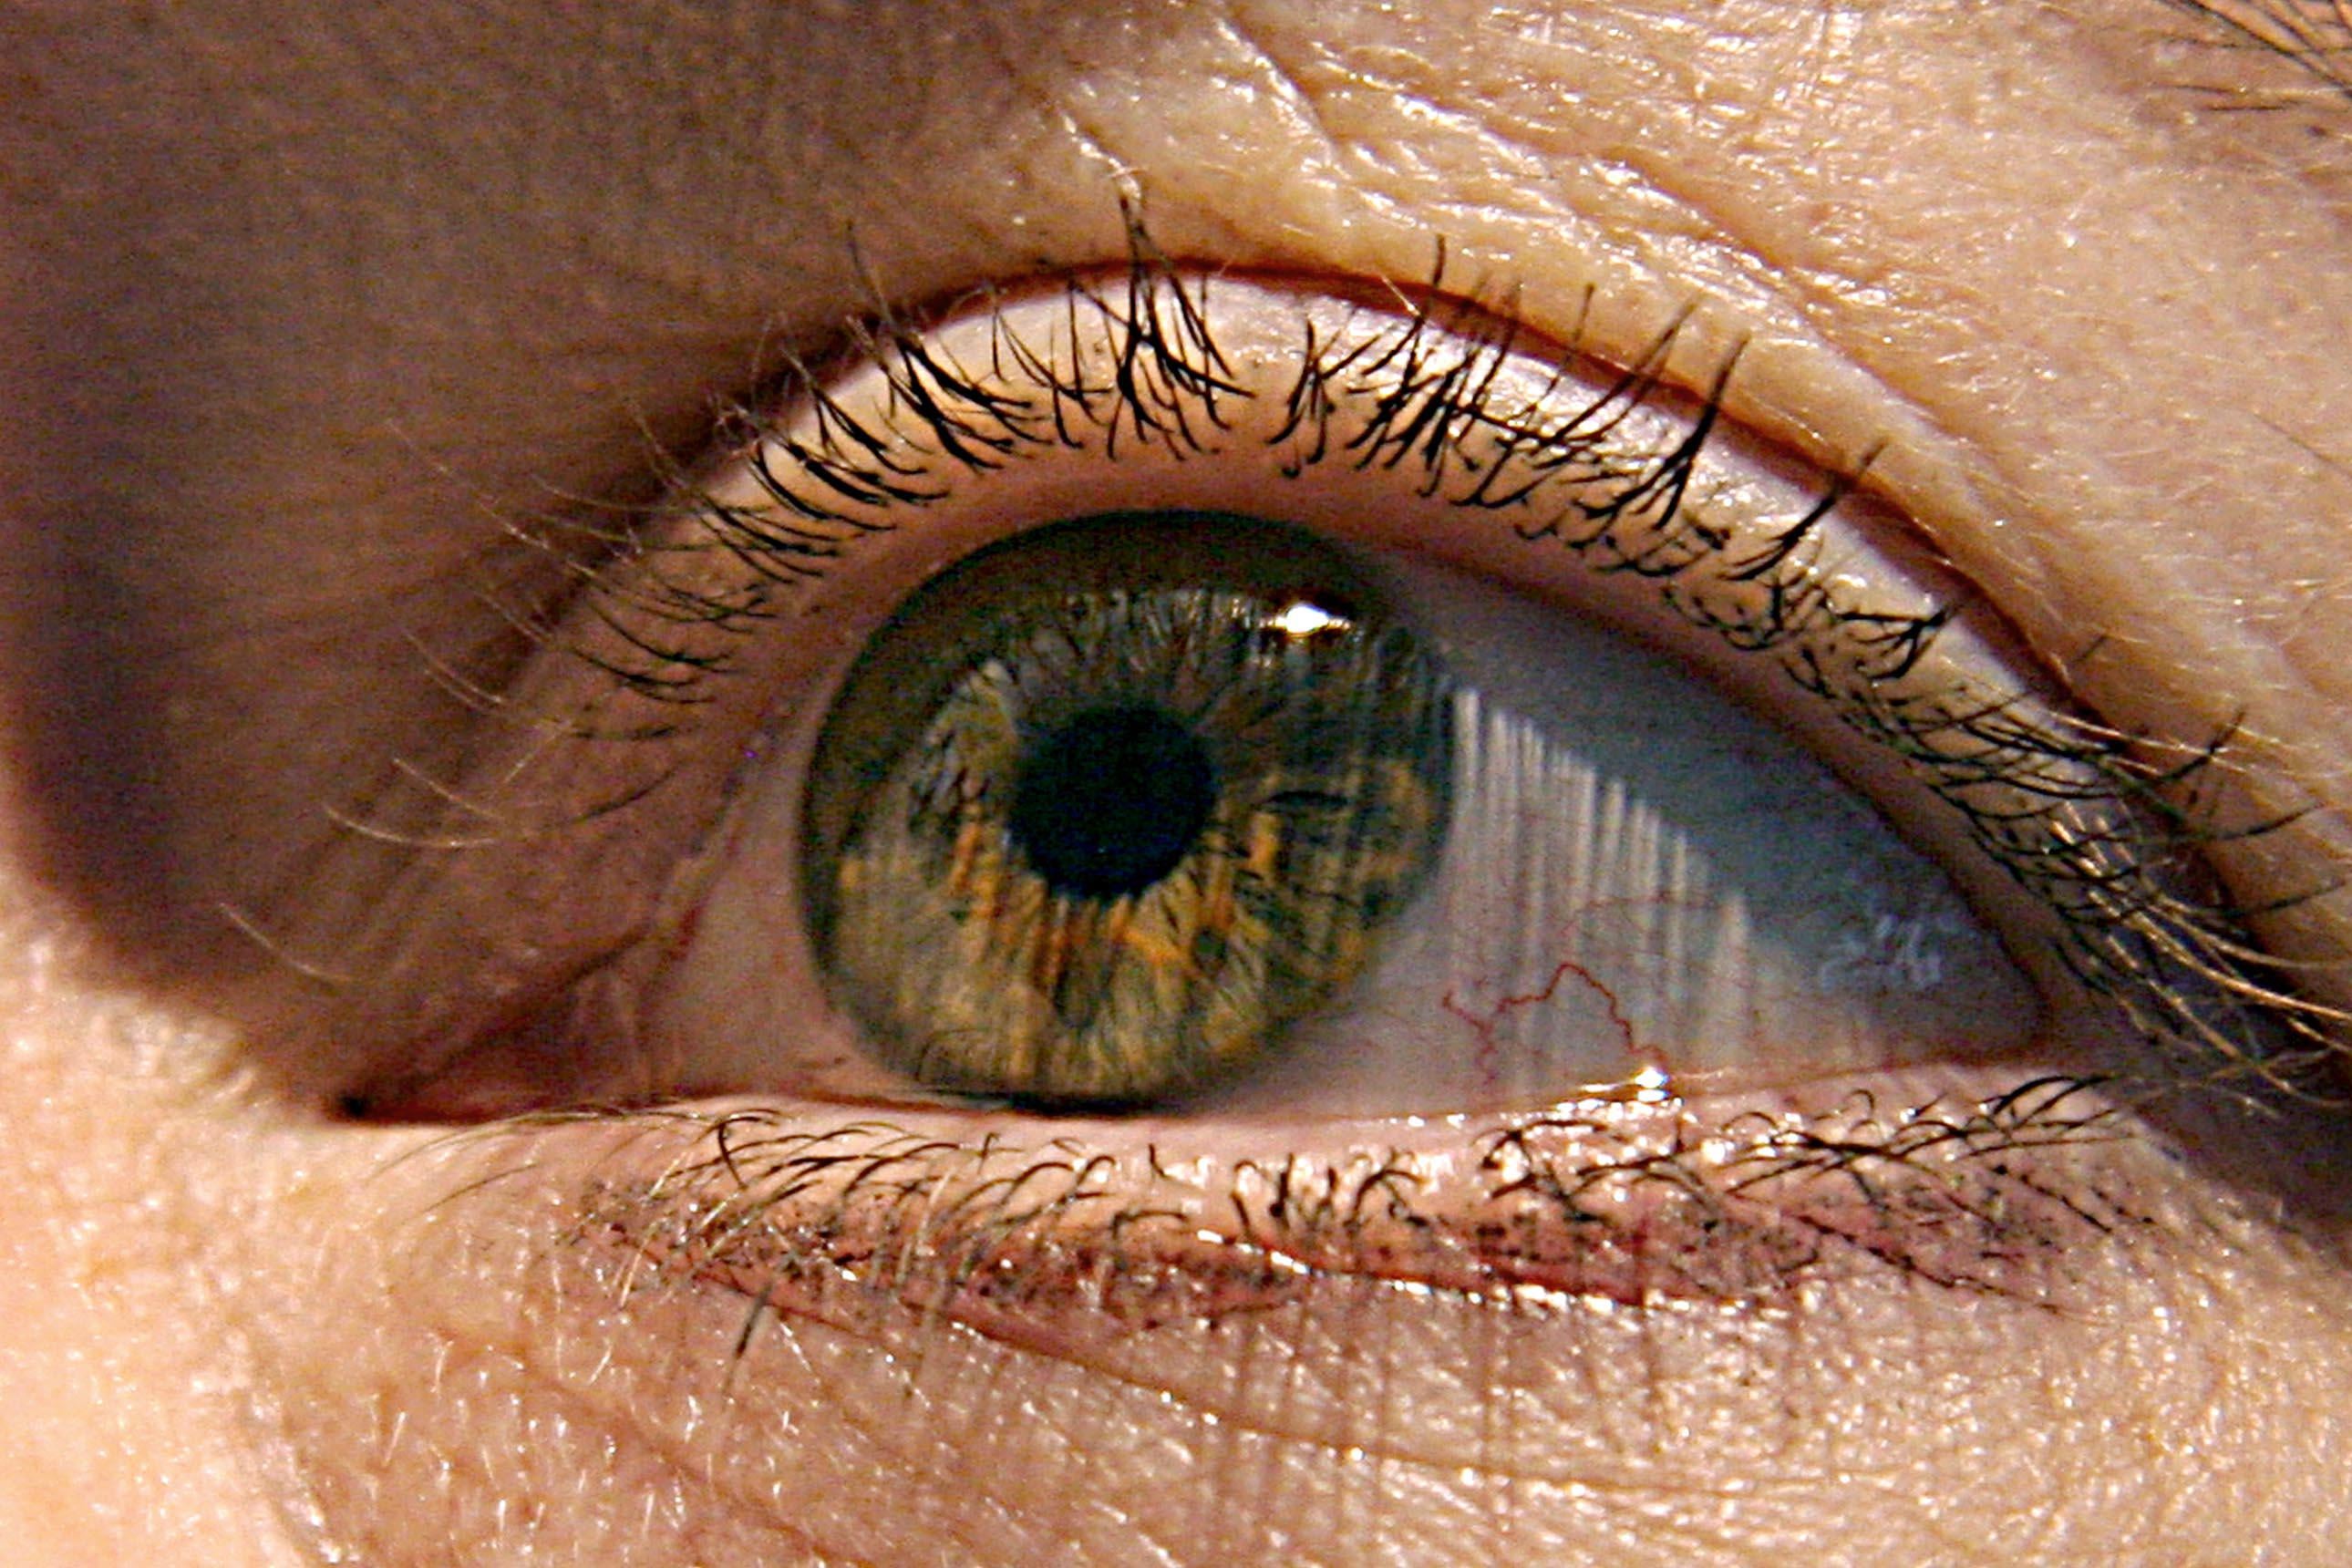 A close photo of a green eyeball with eyelids wide open.